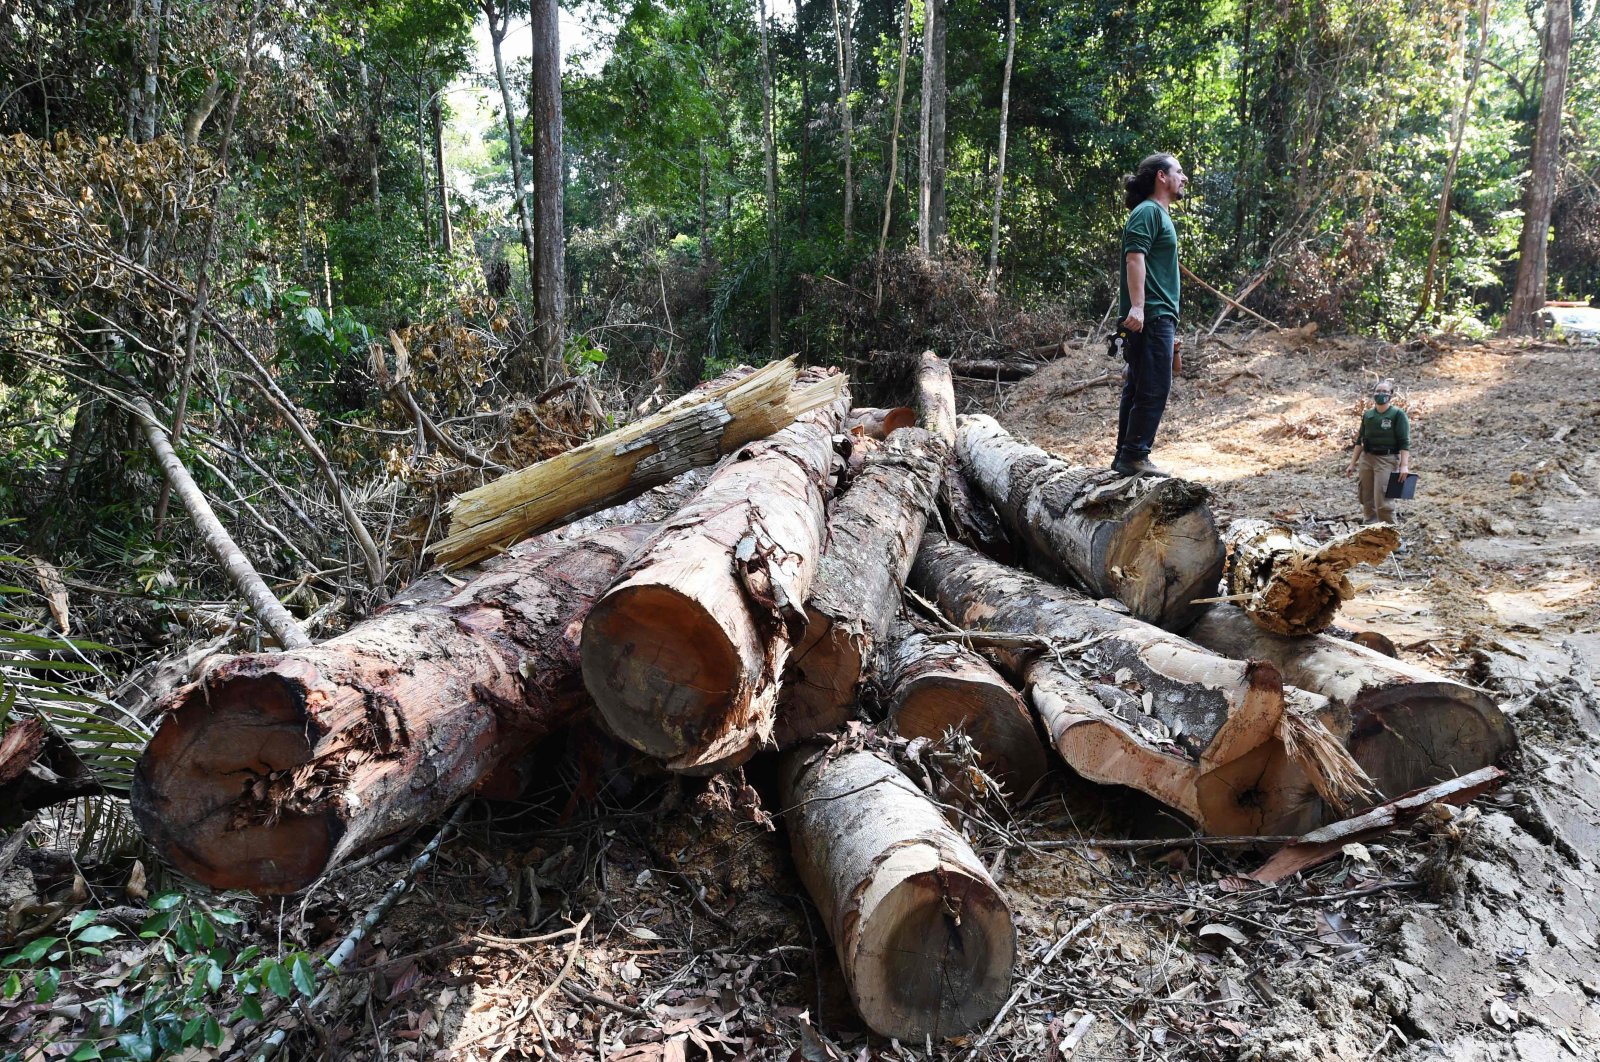 Officials from Para State, northern Brazil, inspect a deforested area in the Amazon rain forest during surveillance in the municipality of Pacaja, Brazil, Sept. 22, 2021. (AFP Photo)